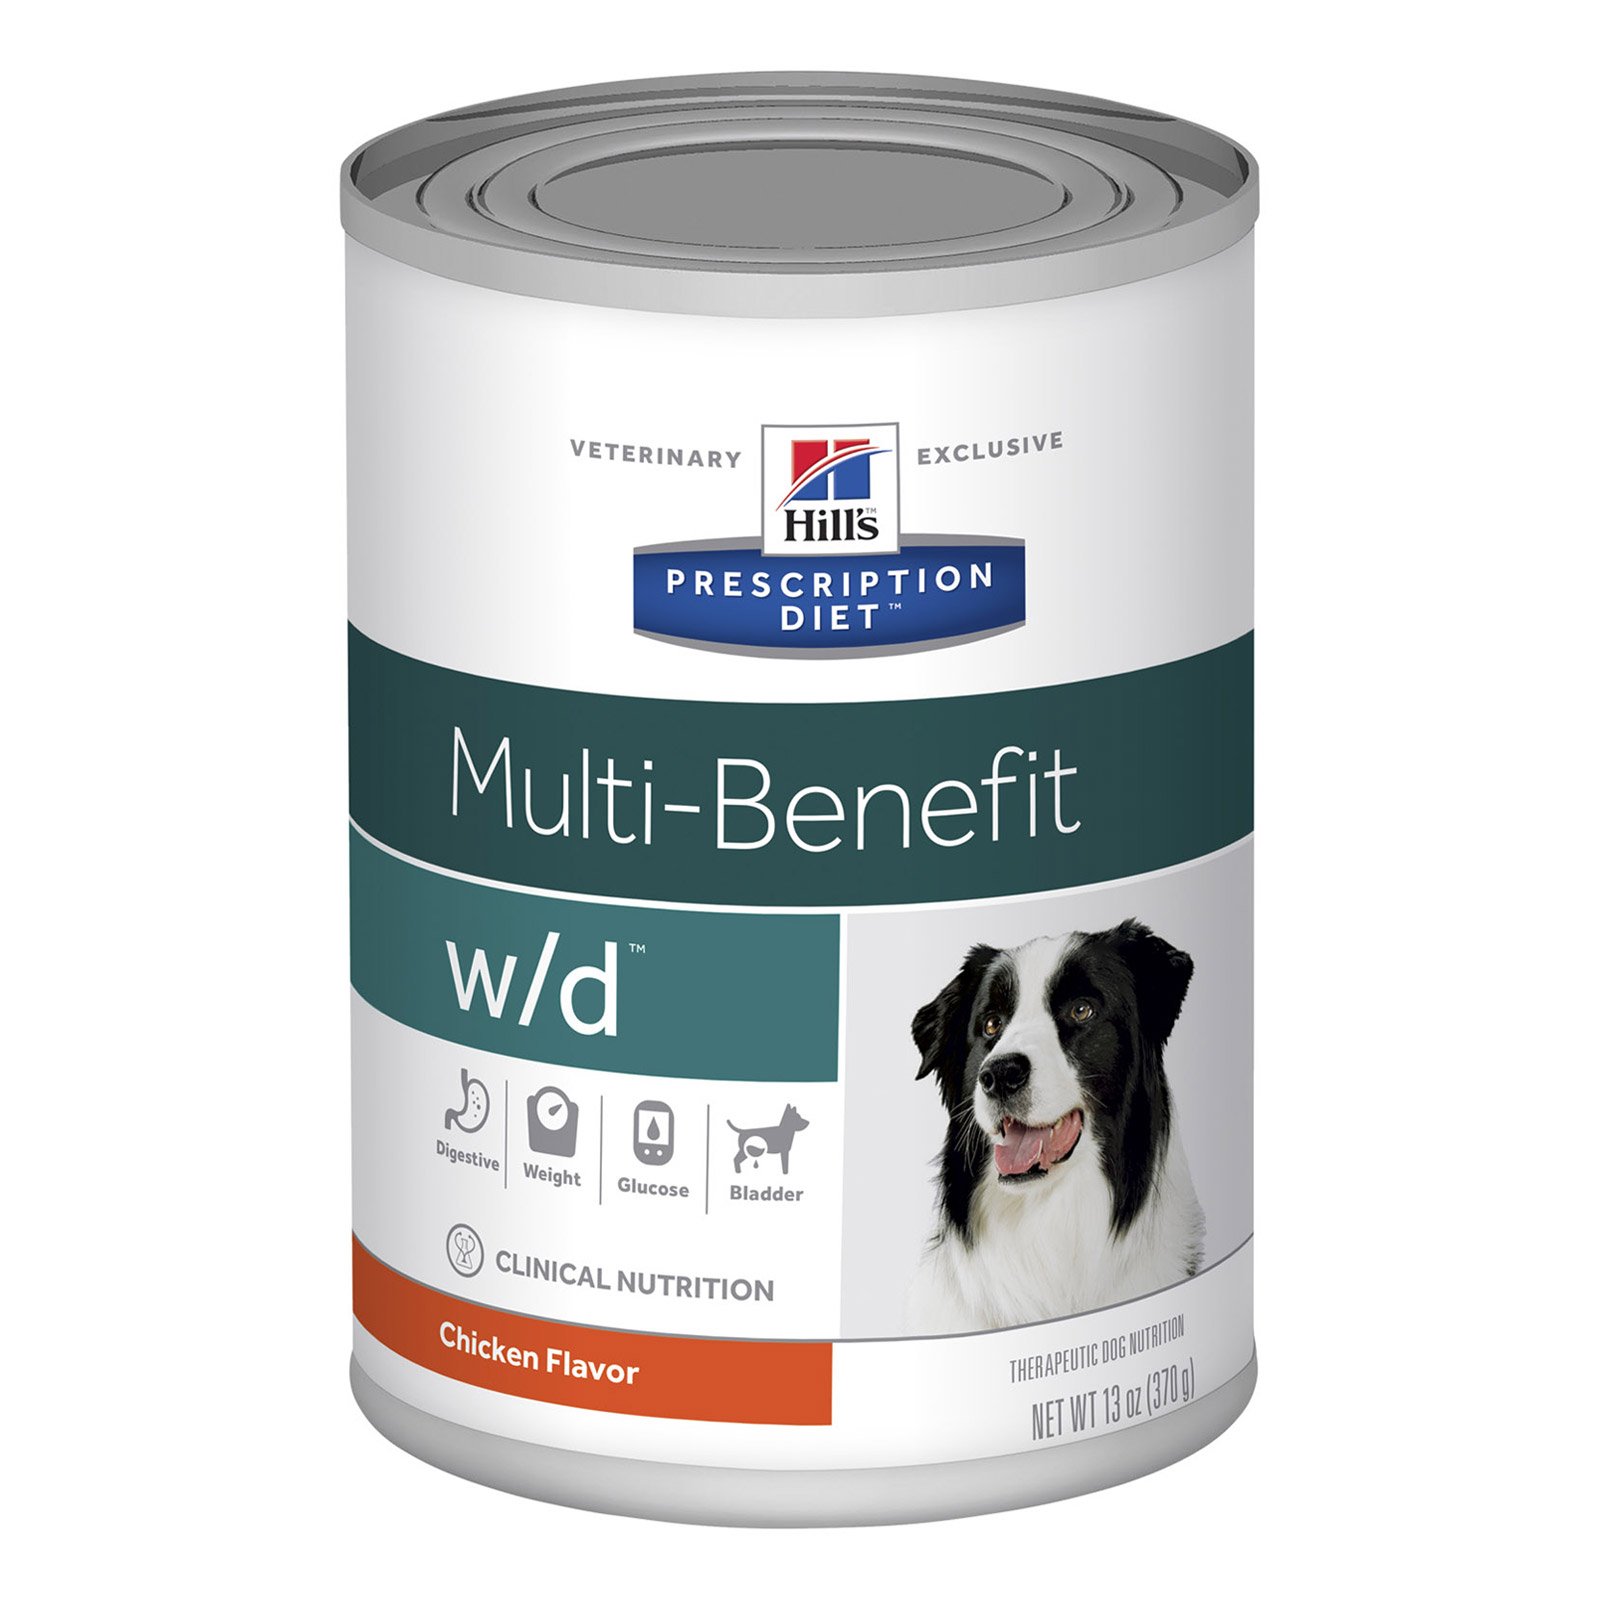 Hill's Prescription Diet w/d Digestive/Weight/Glucose Management Canned Dog Food